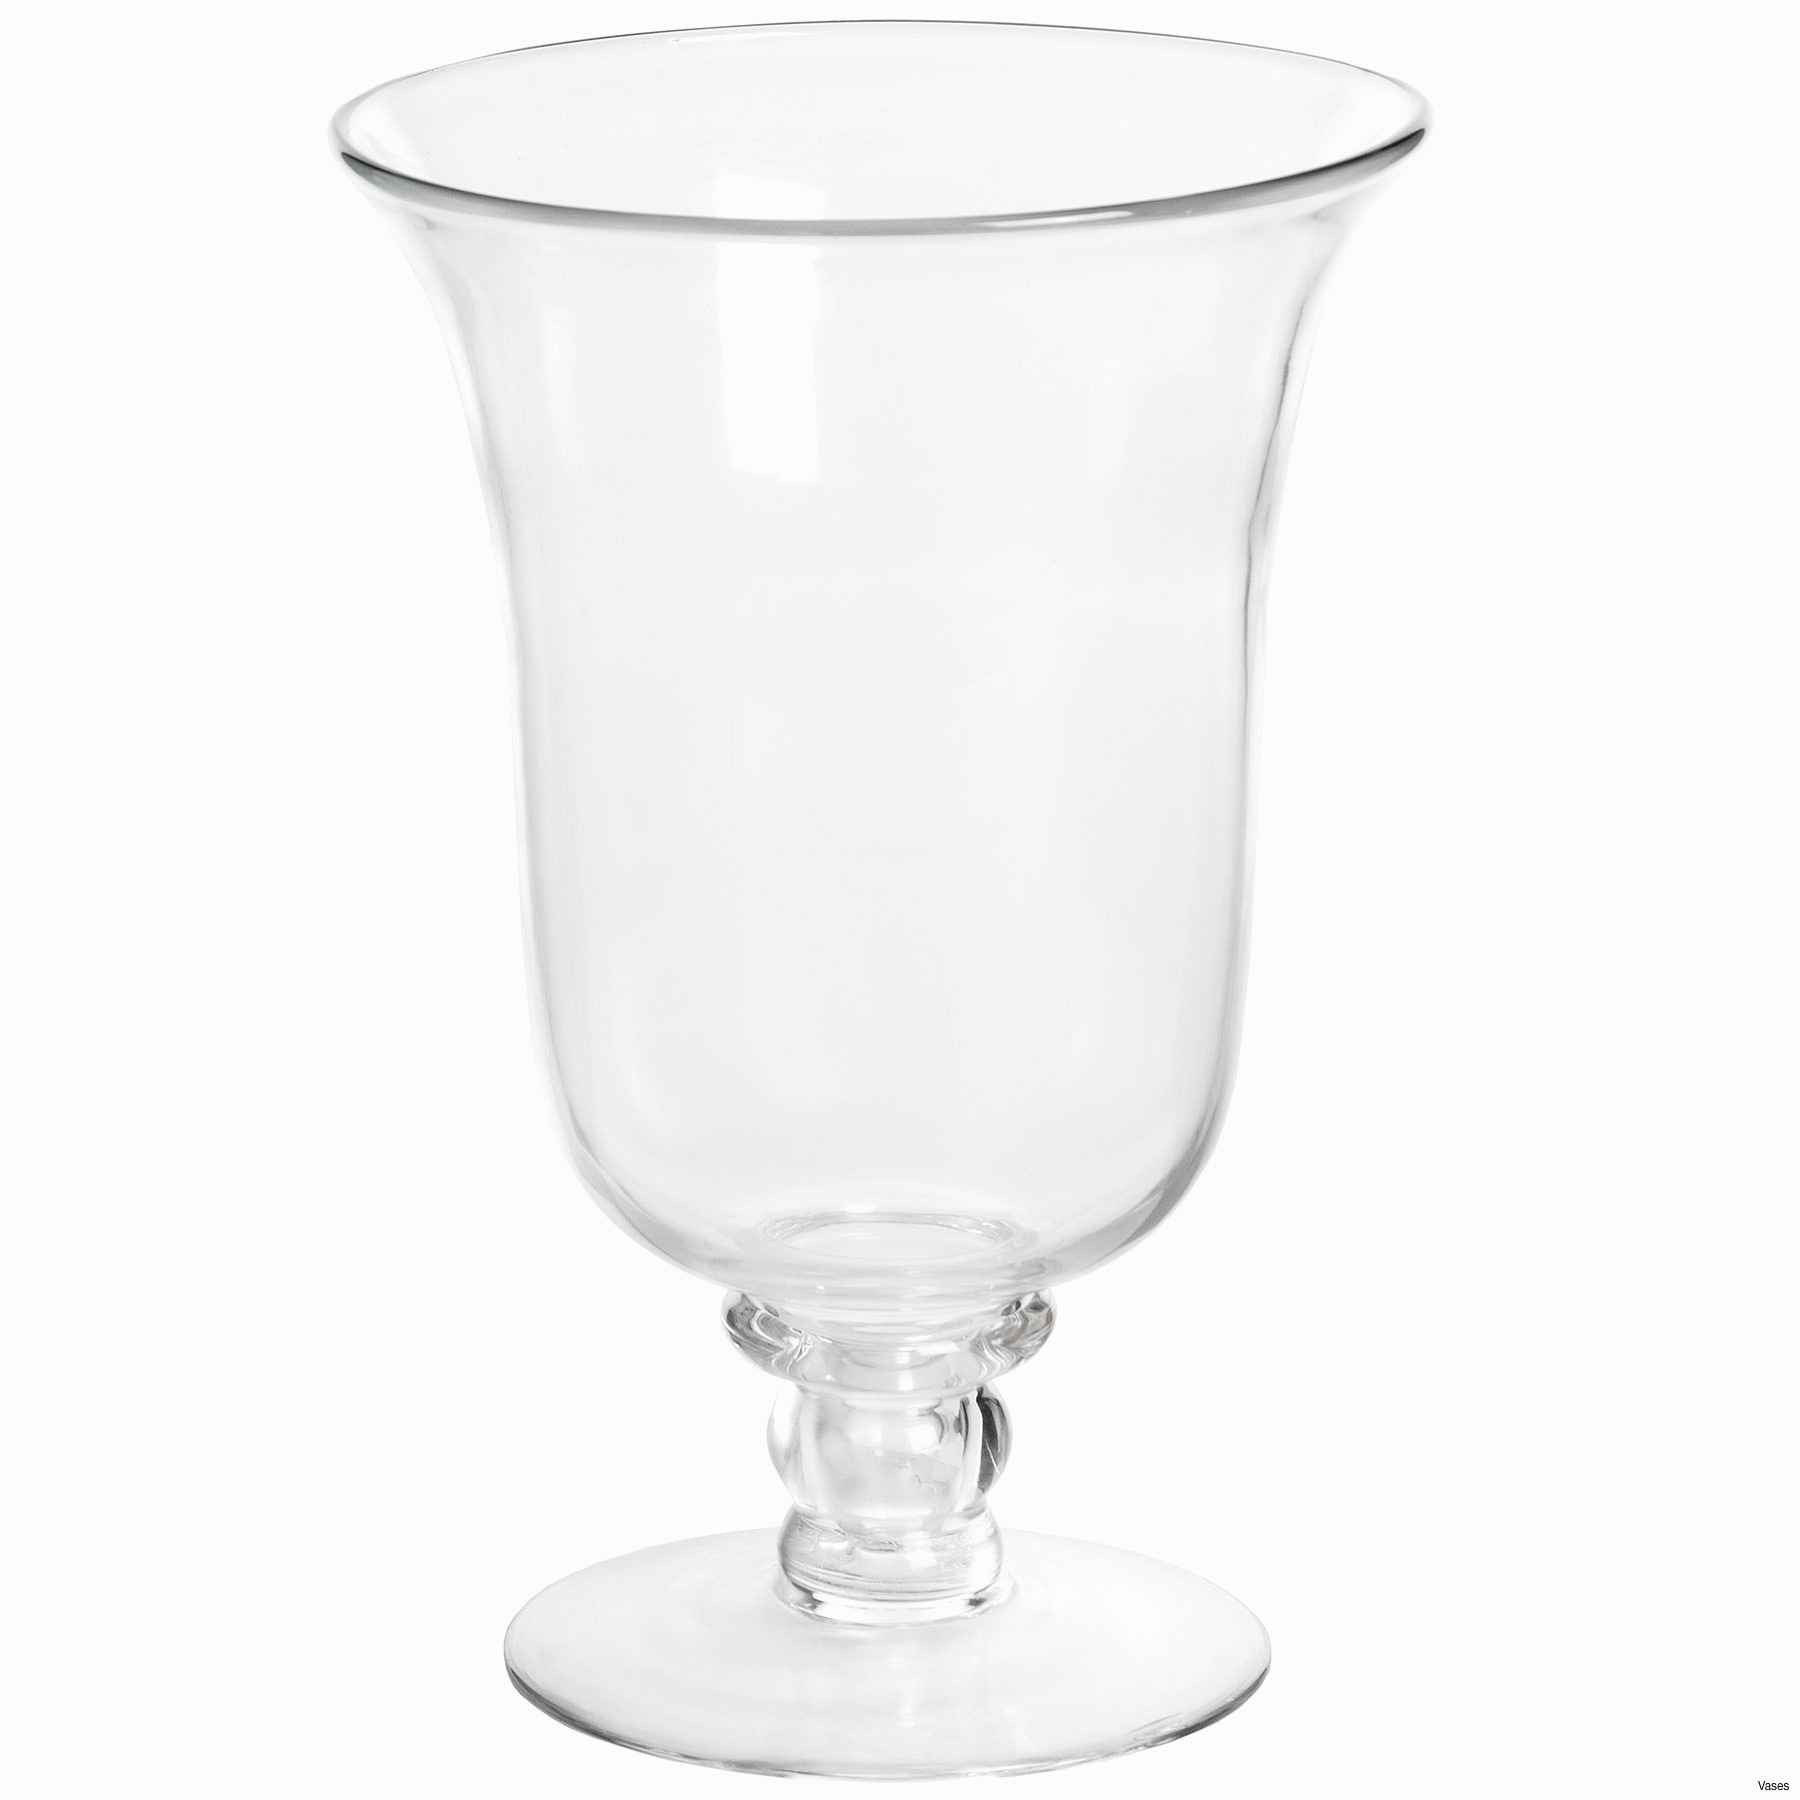 Vases for Sale Of wholesale Vases Www topsimages Com Inside Candle Stands wholesale Lovely Faux Crystal Candle Holders Alive Vases Gold Tall Jpgi Cheap Jpg 1800x1800